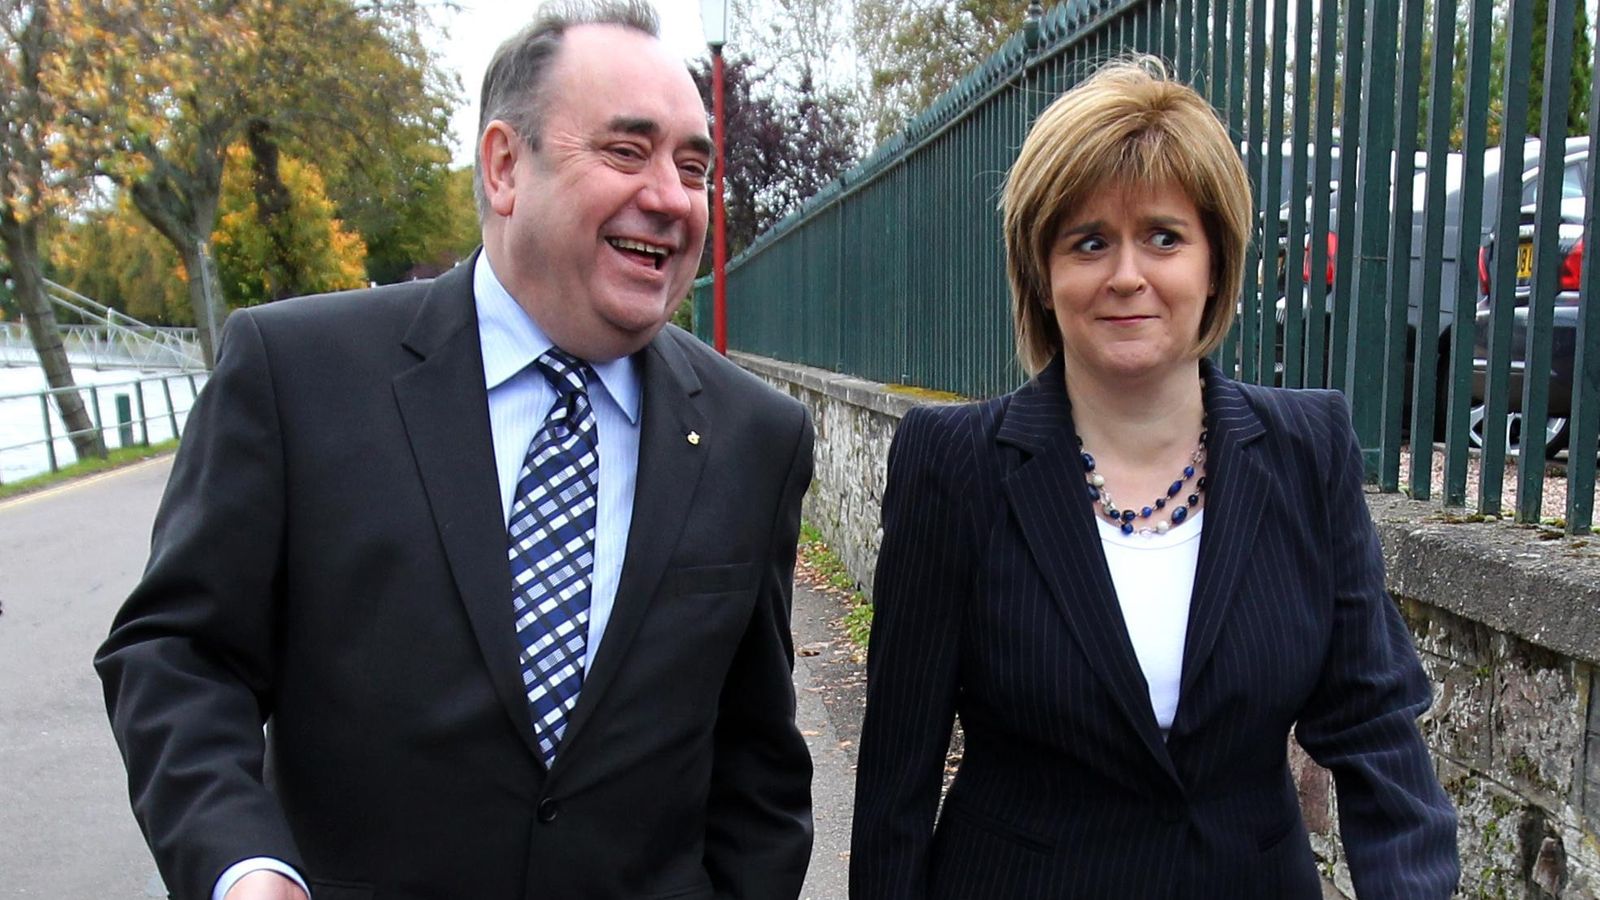 Alex Salmond says 'never say never' about reconciliation with Nicola Sturgeon